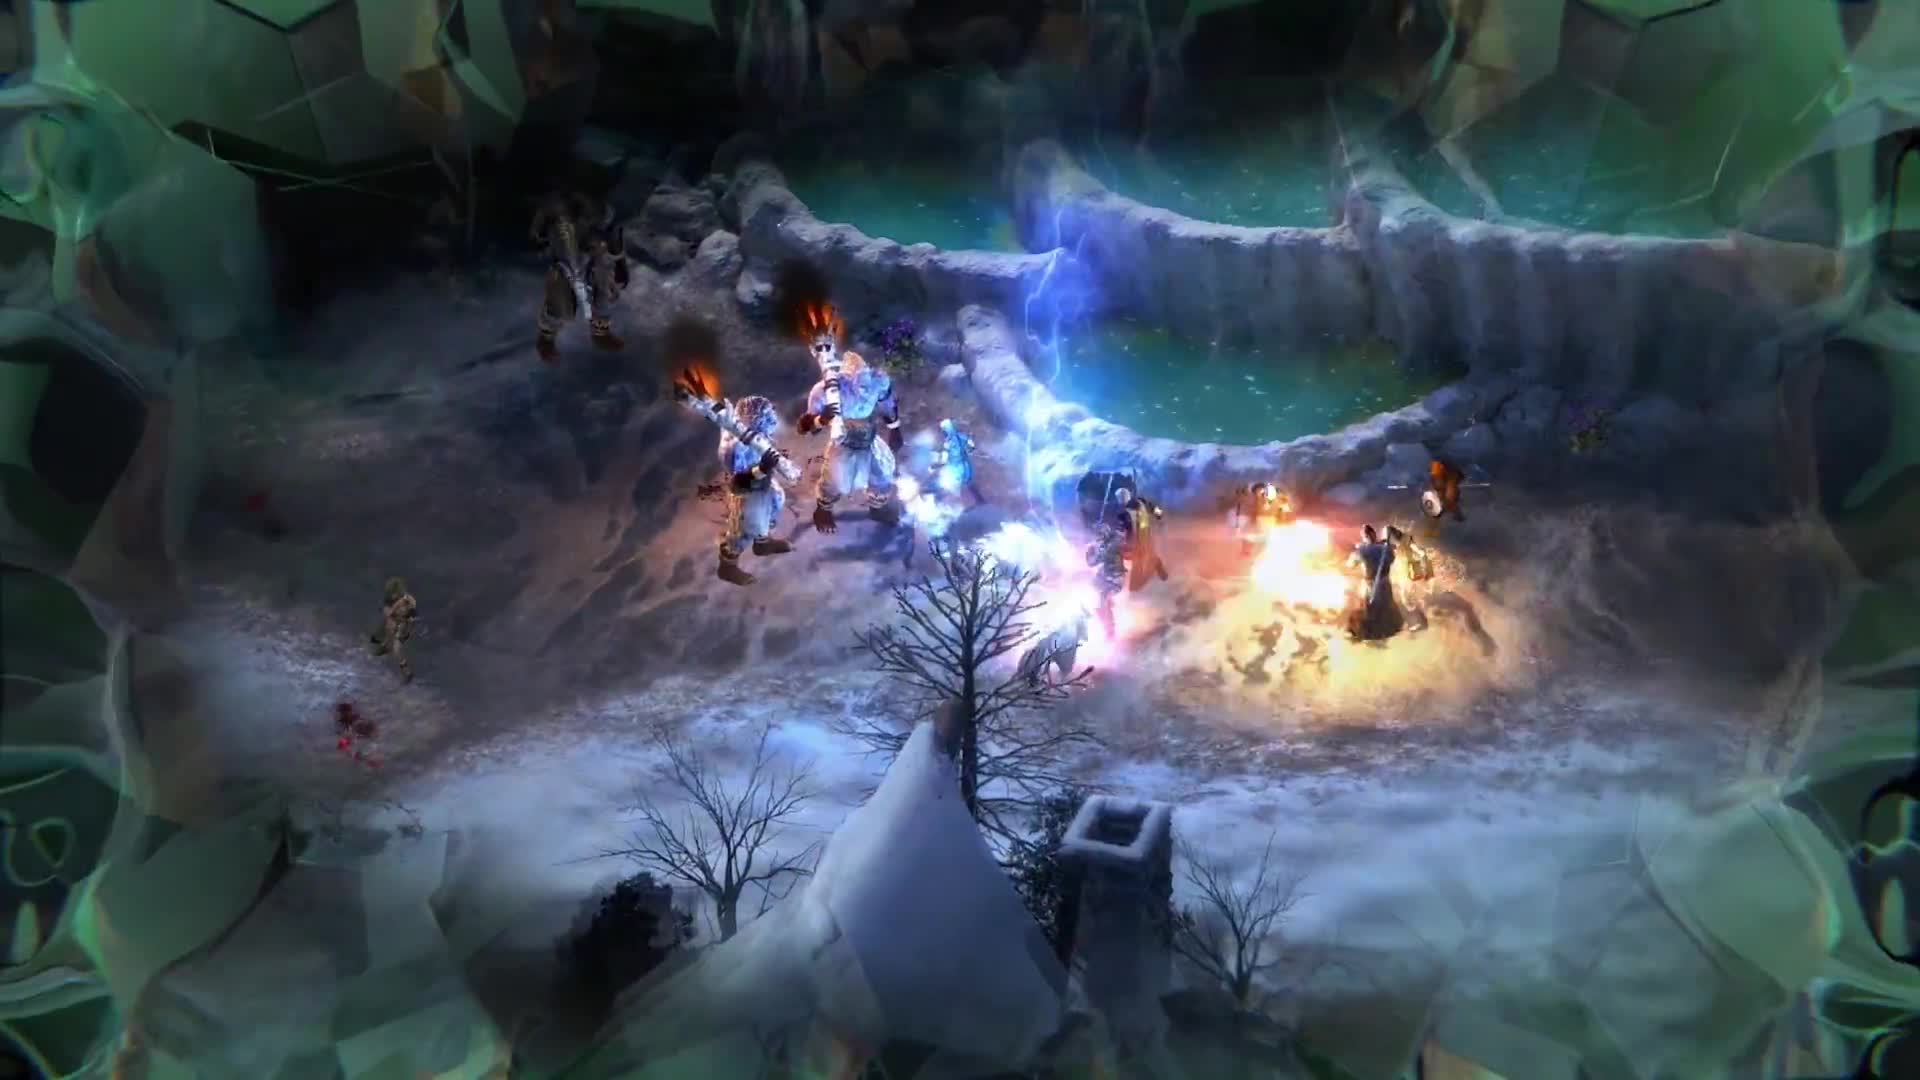 Pillars of Eternity: Complete Edition - Launch Trailer